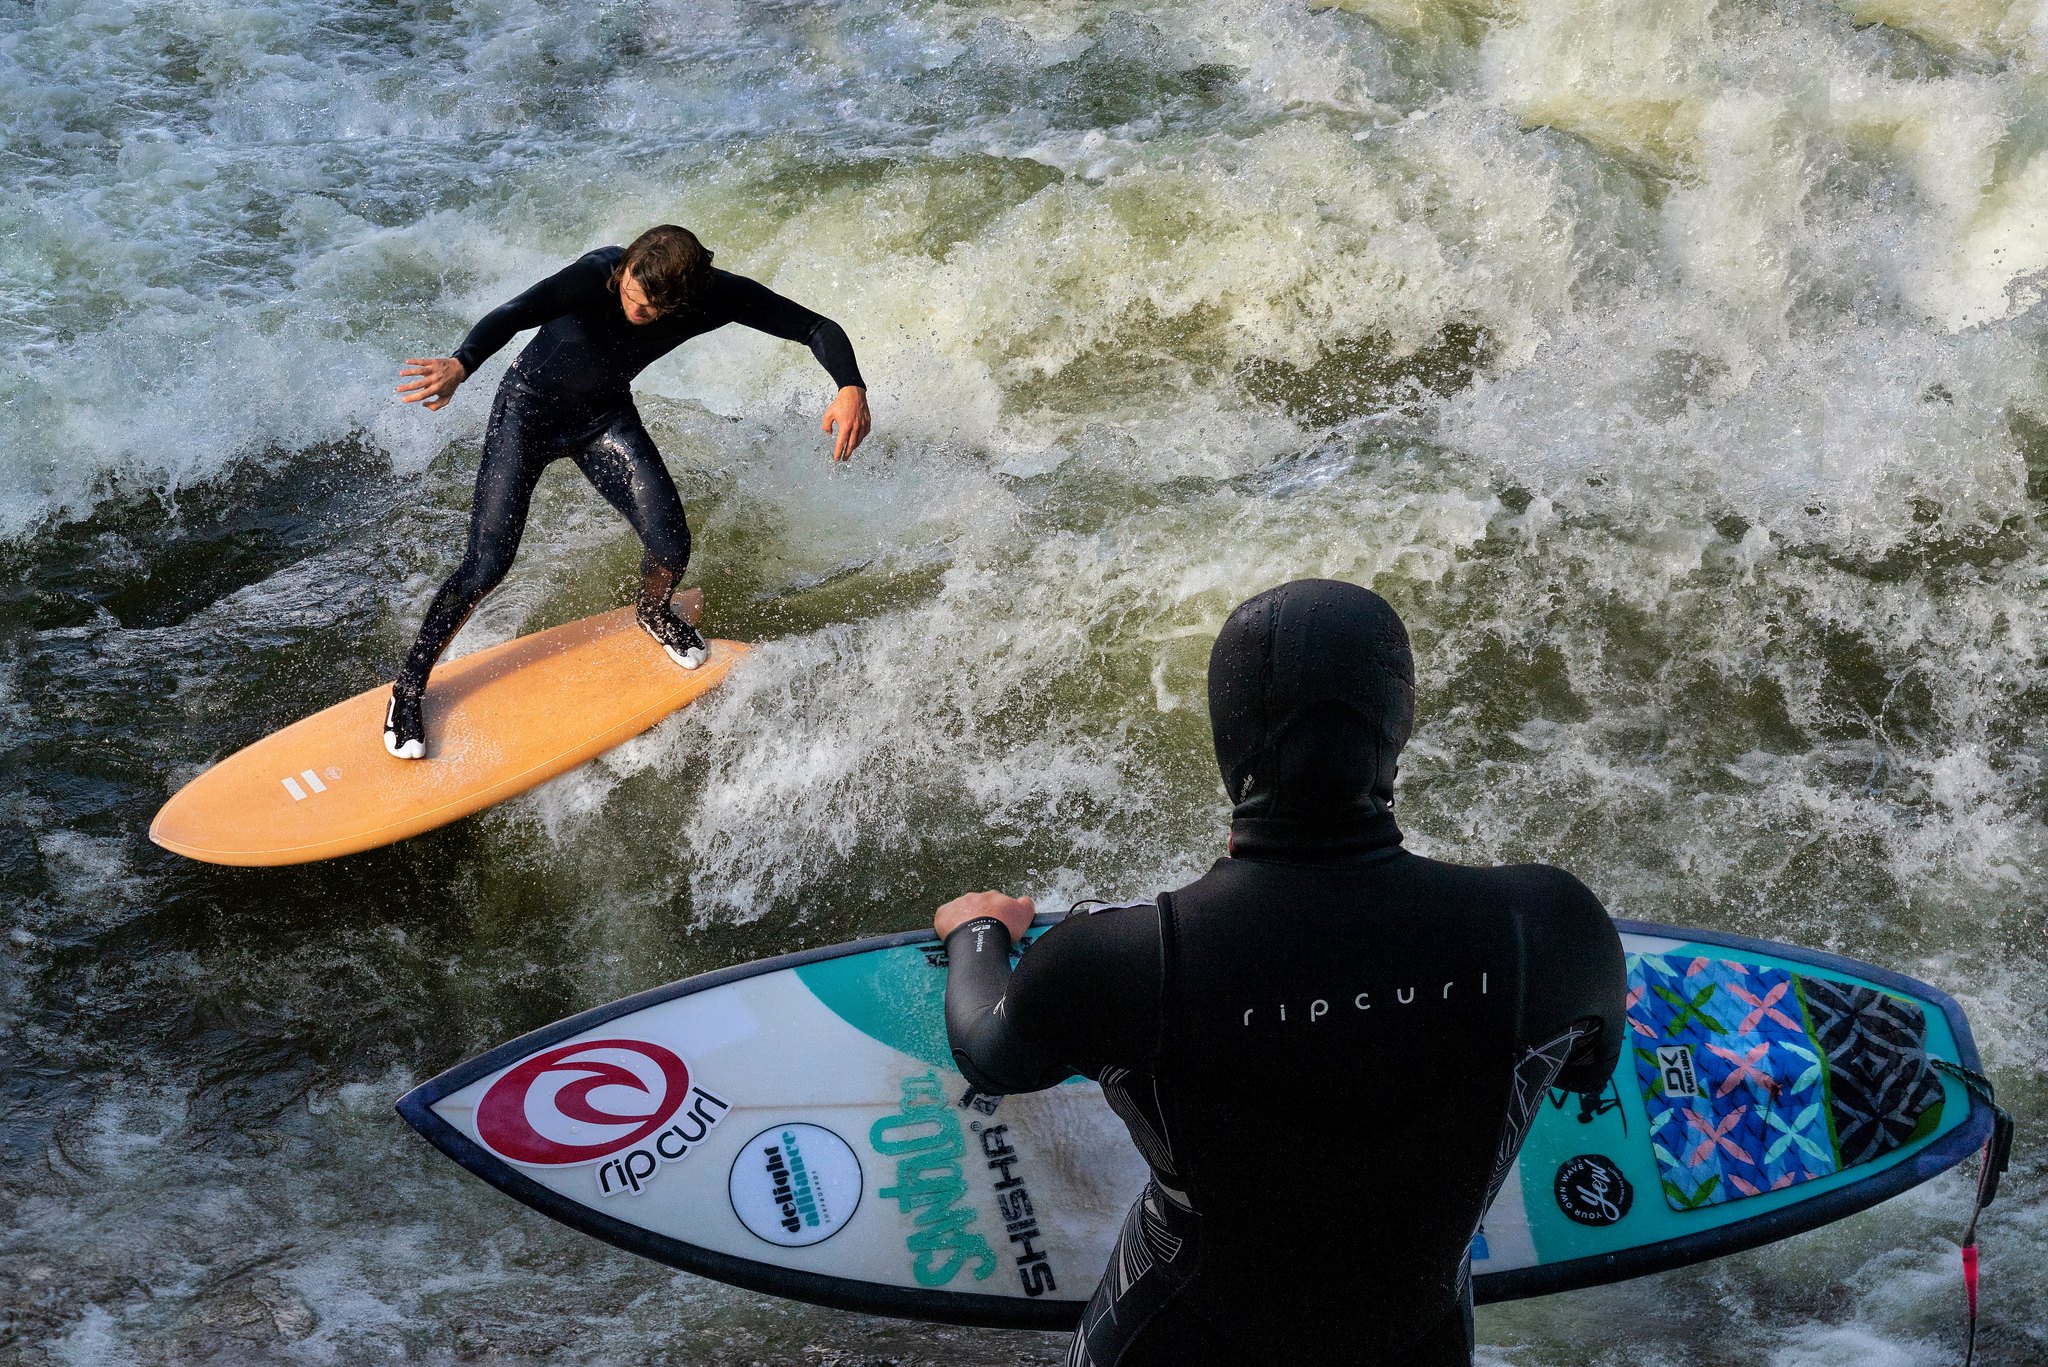 Eisbach river surfers